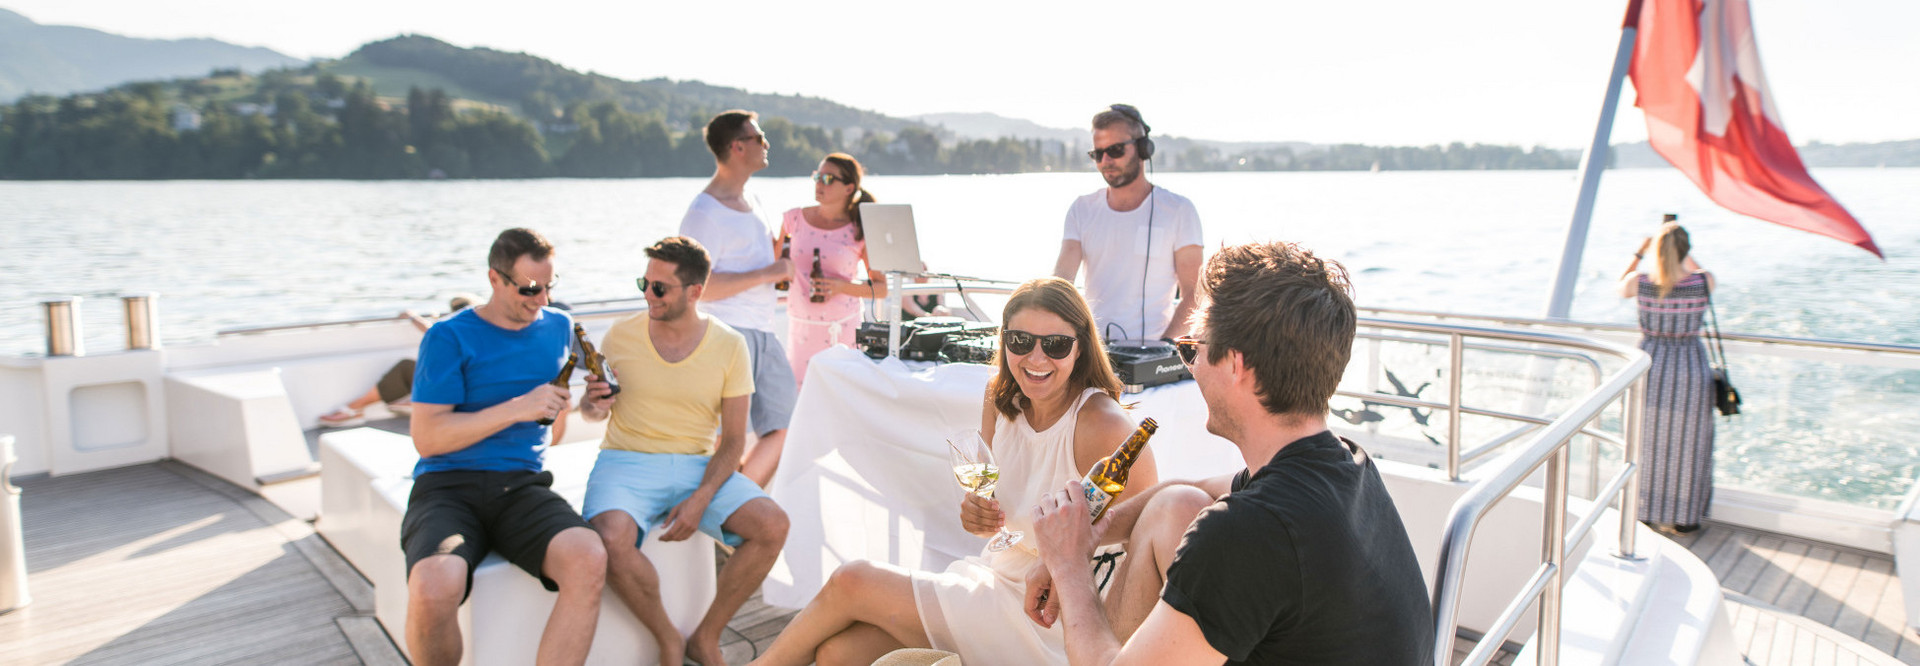 Experience and enjoy a culinary cruise and musical summer evening on the motorboat Diamant.